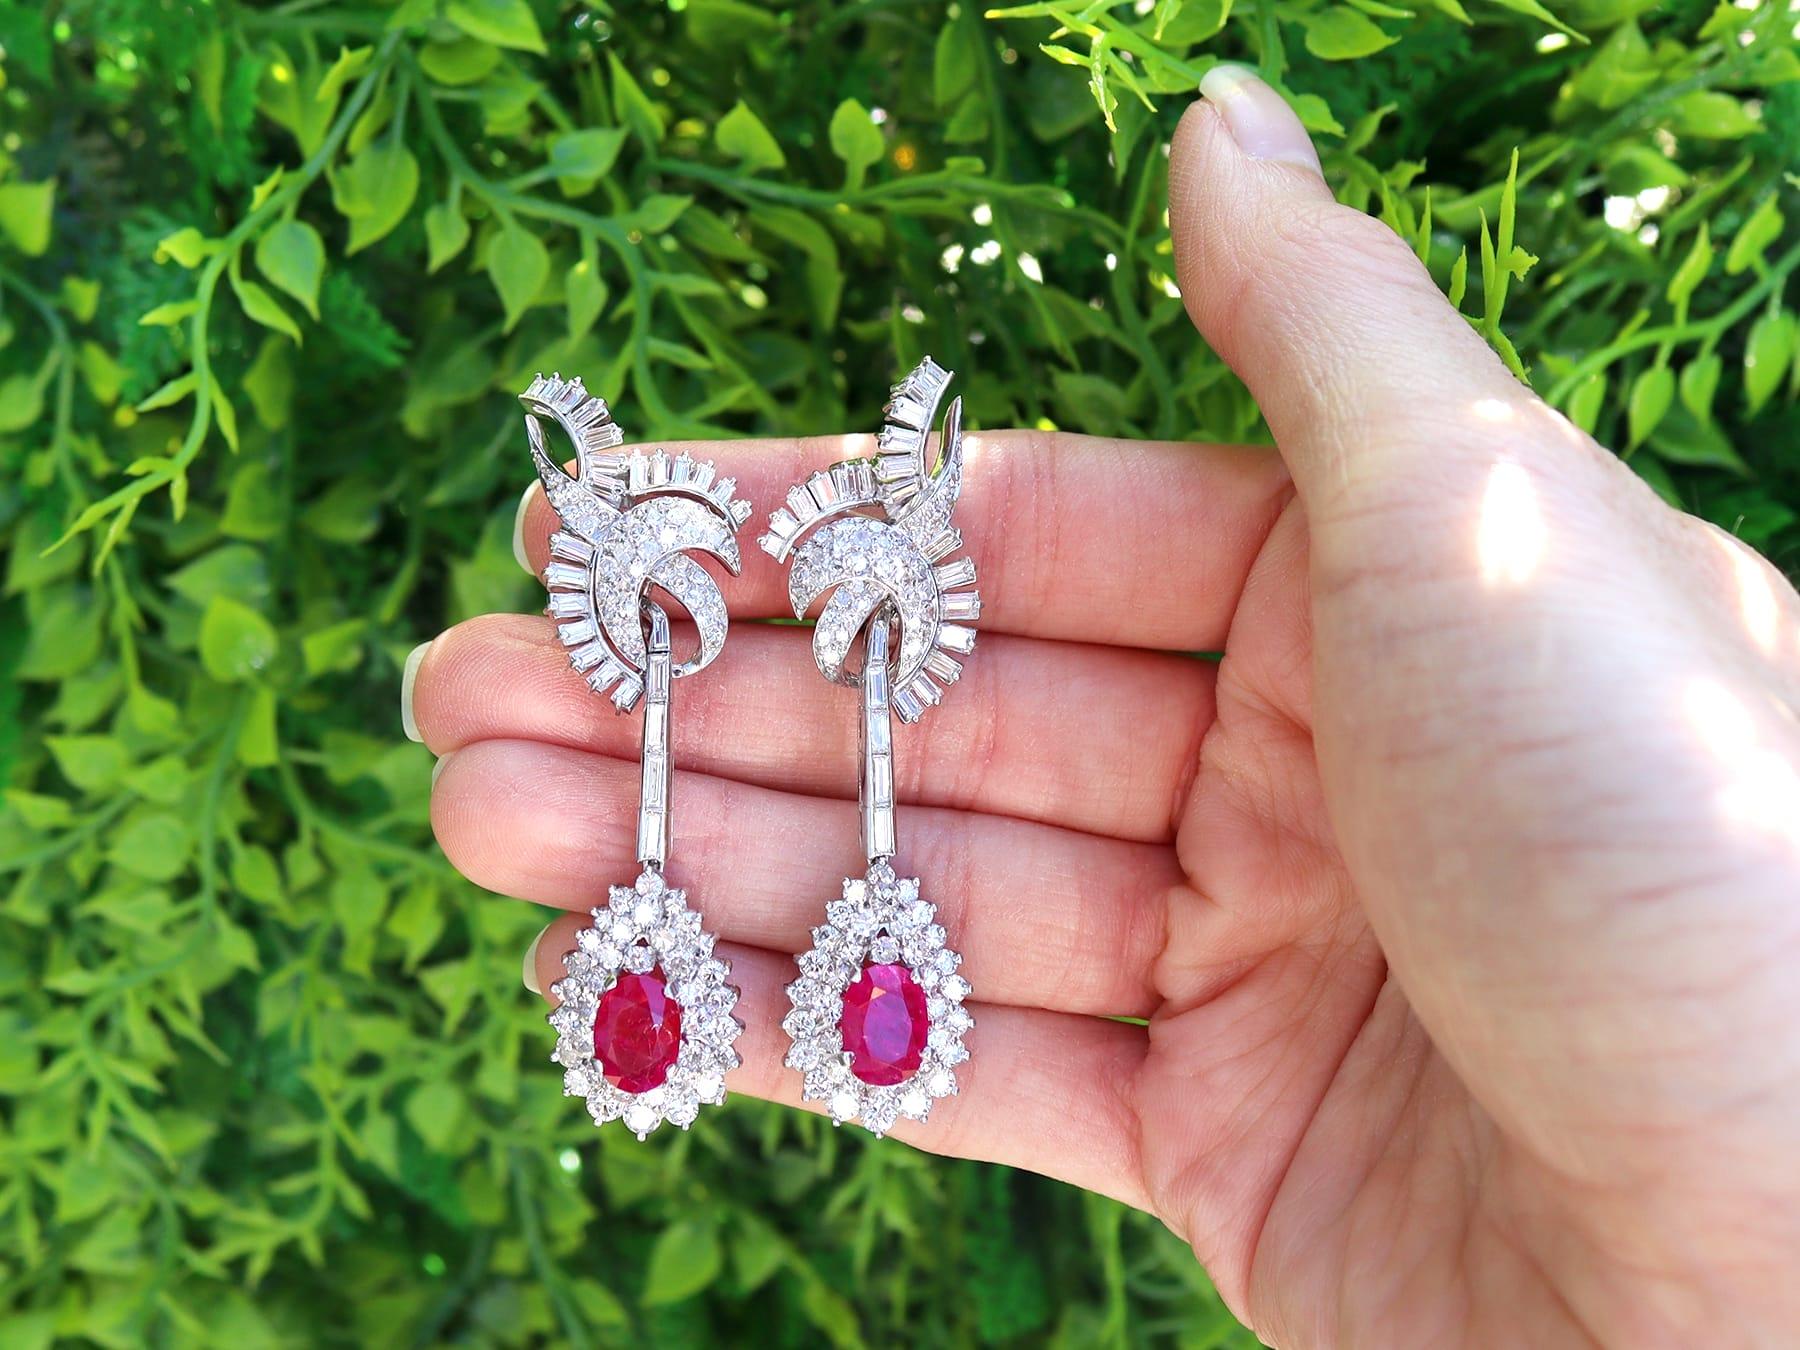 A stunning, fine and impressive pair of antique 6.42 carat ruby and 8.56 carat diamond, platinum earrings; part of our diverse ruby jewellery collection

These stunning, fine and impressive antique drop earrings have been crafted in platinum.

Each